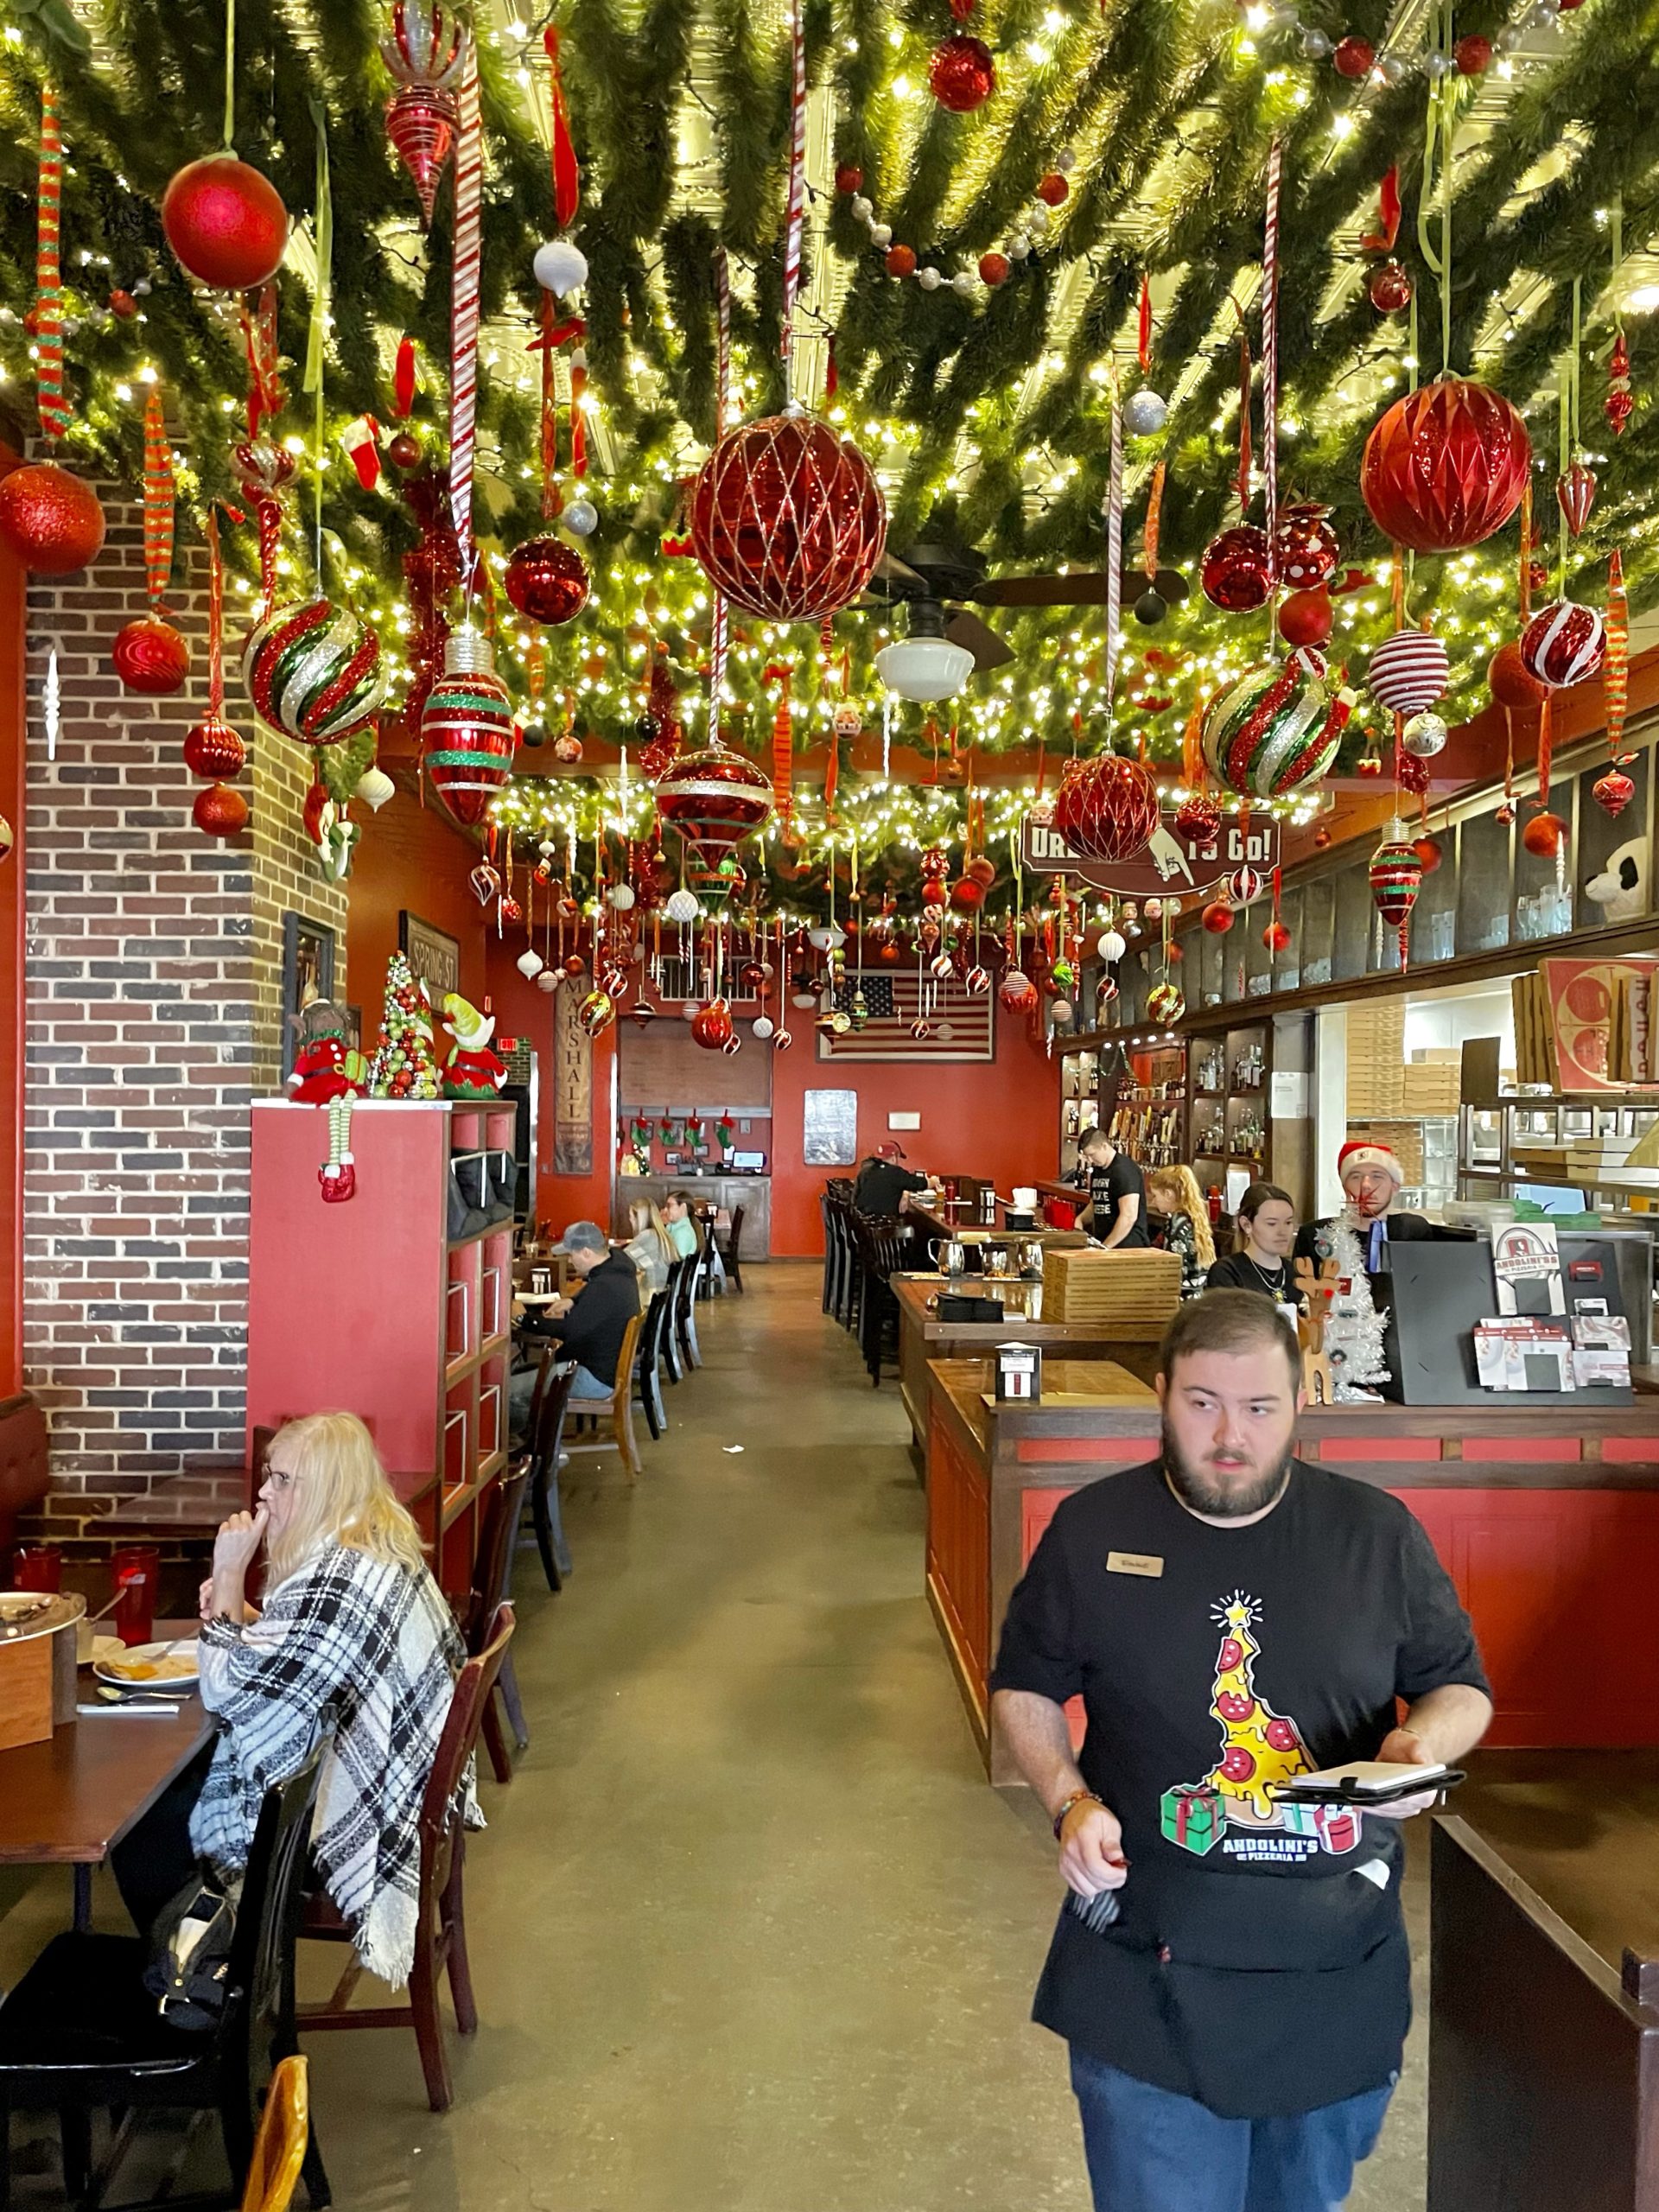 Andolinis Pizza for the Holidays – Christmas Decorated Restaurant in Broken Arrow